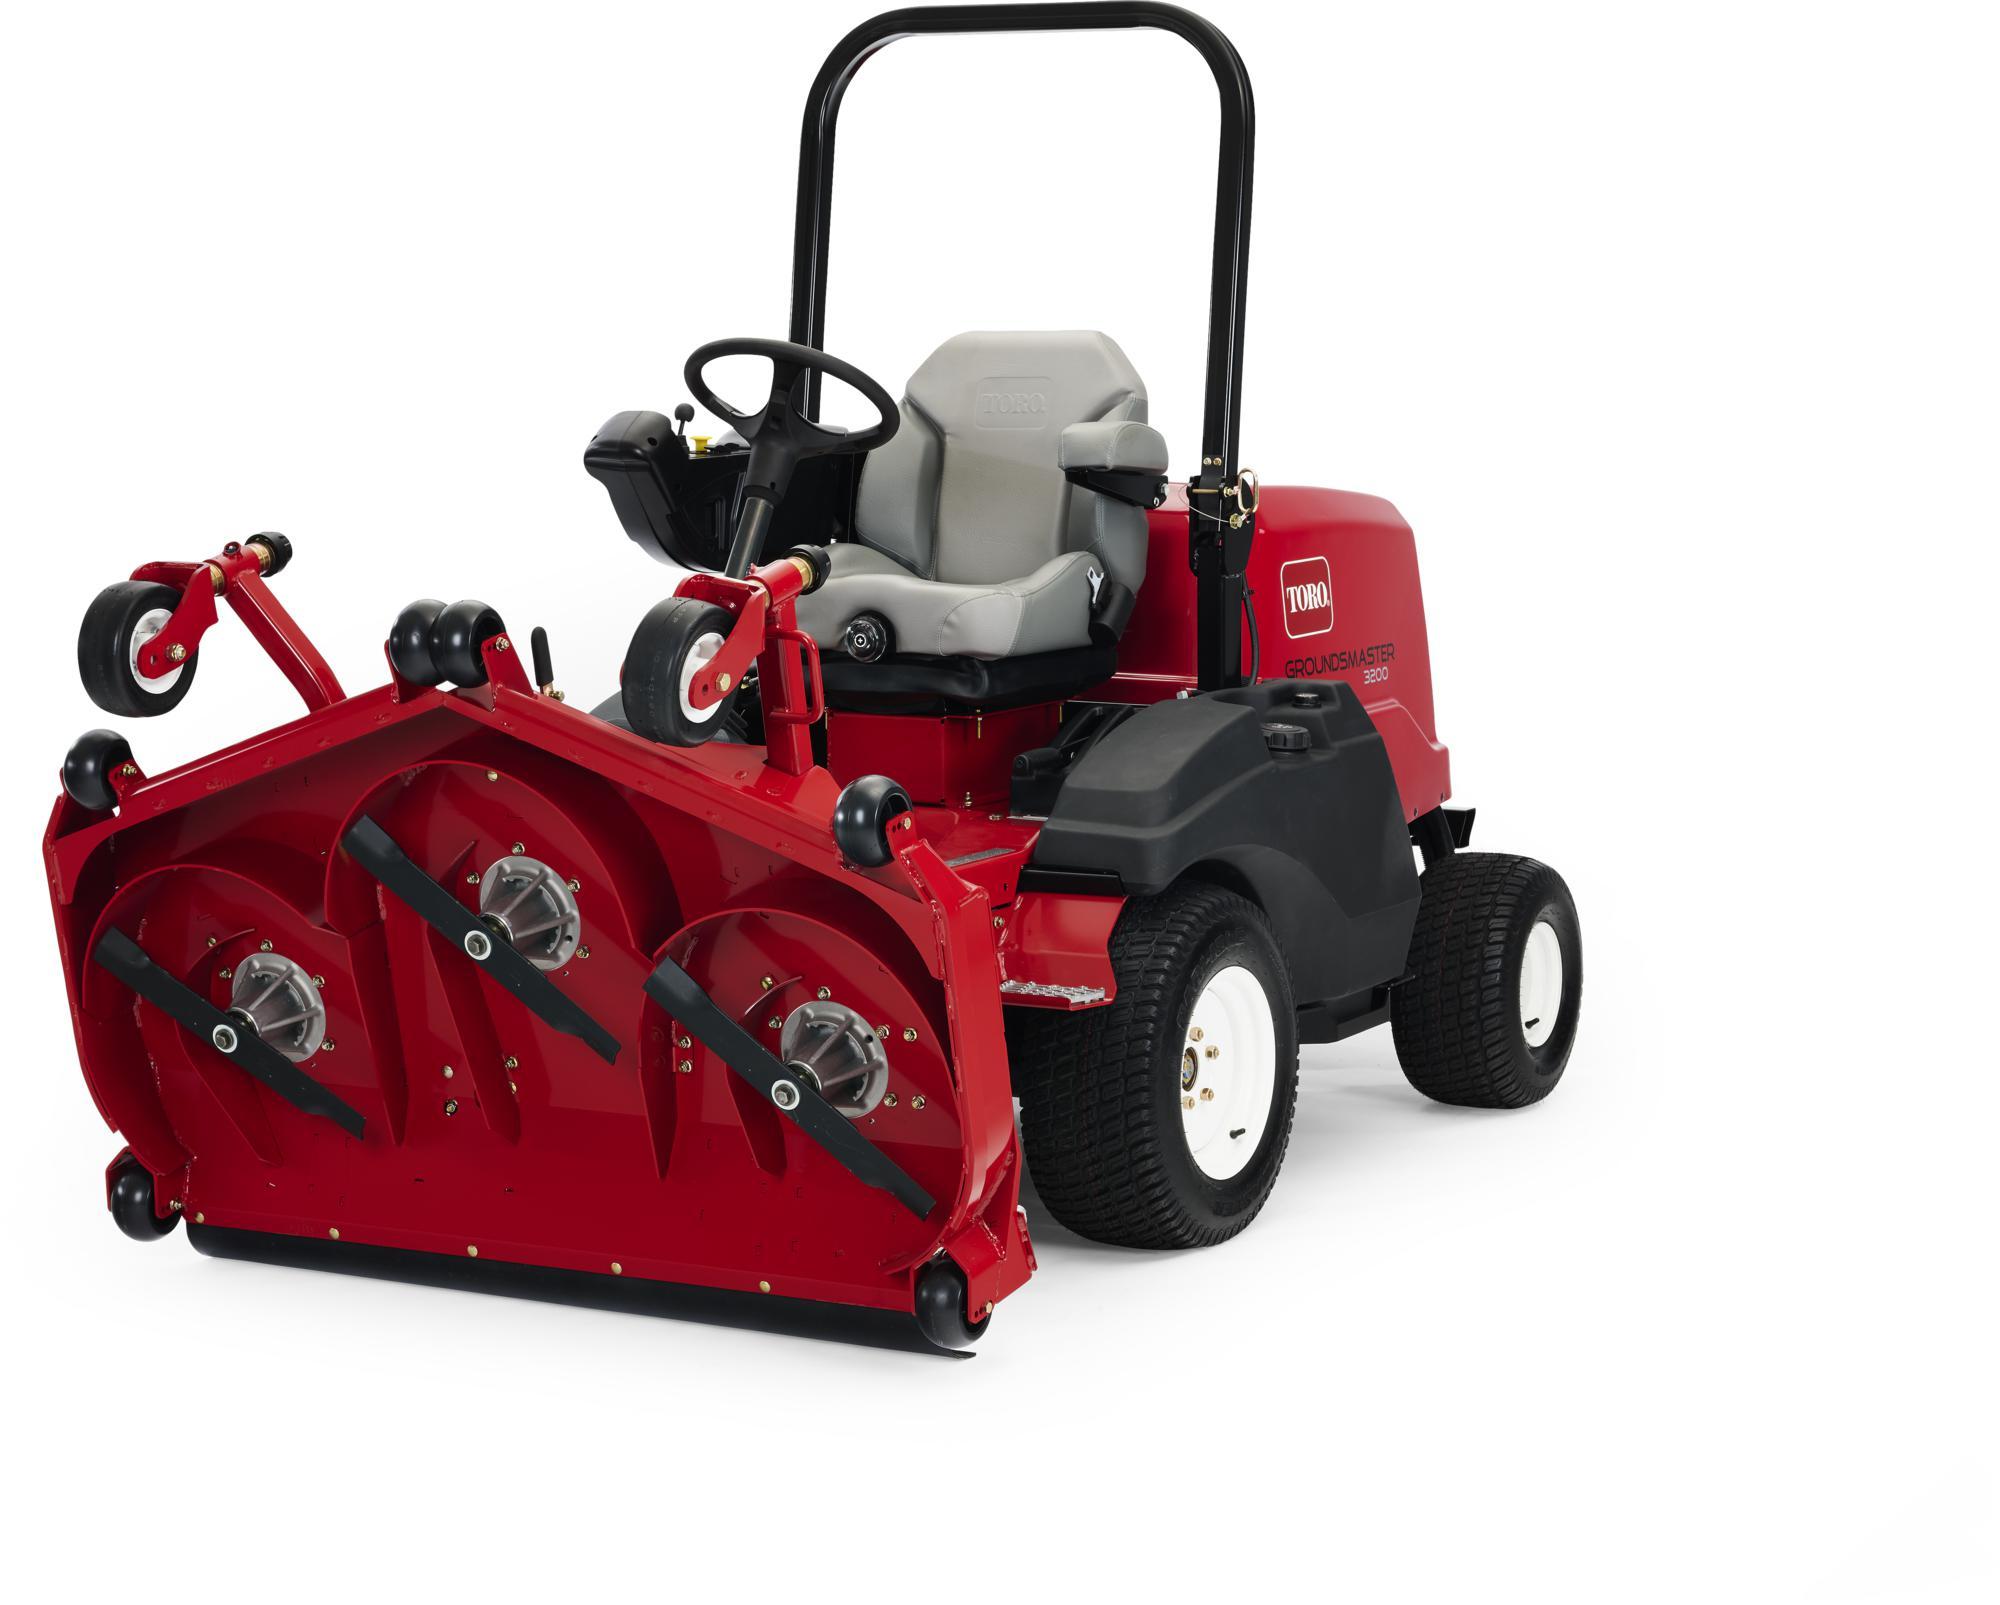 The new Toro Groundsmaster® 3000 Series Out-Front mower